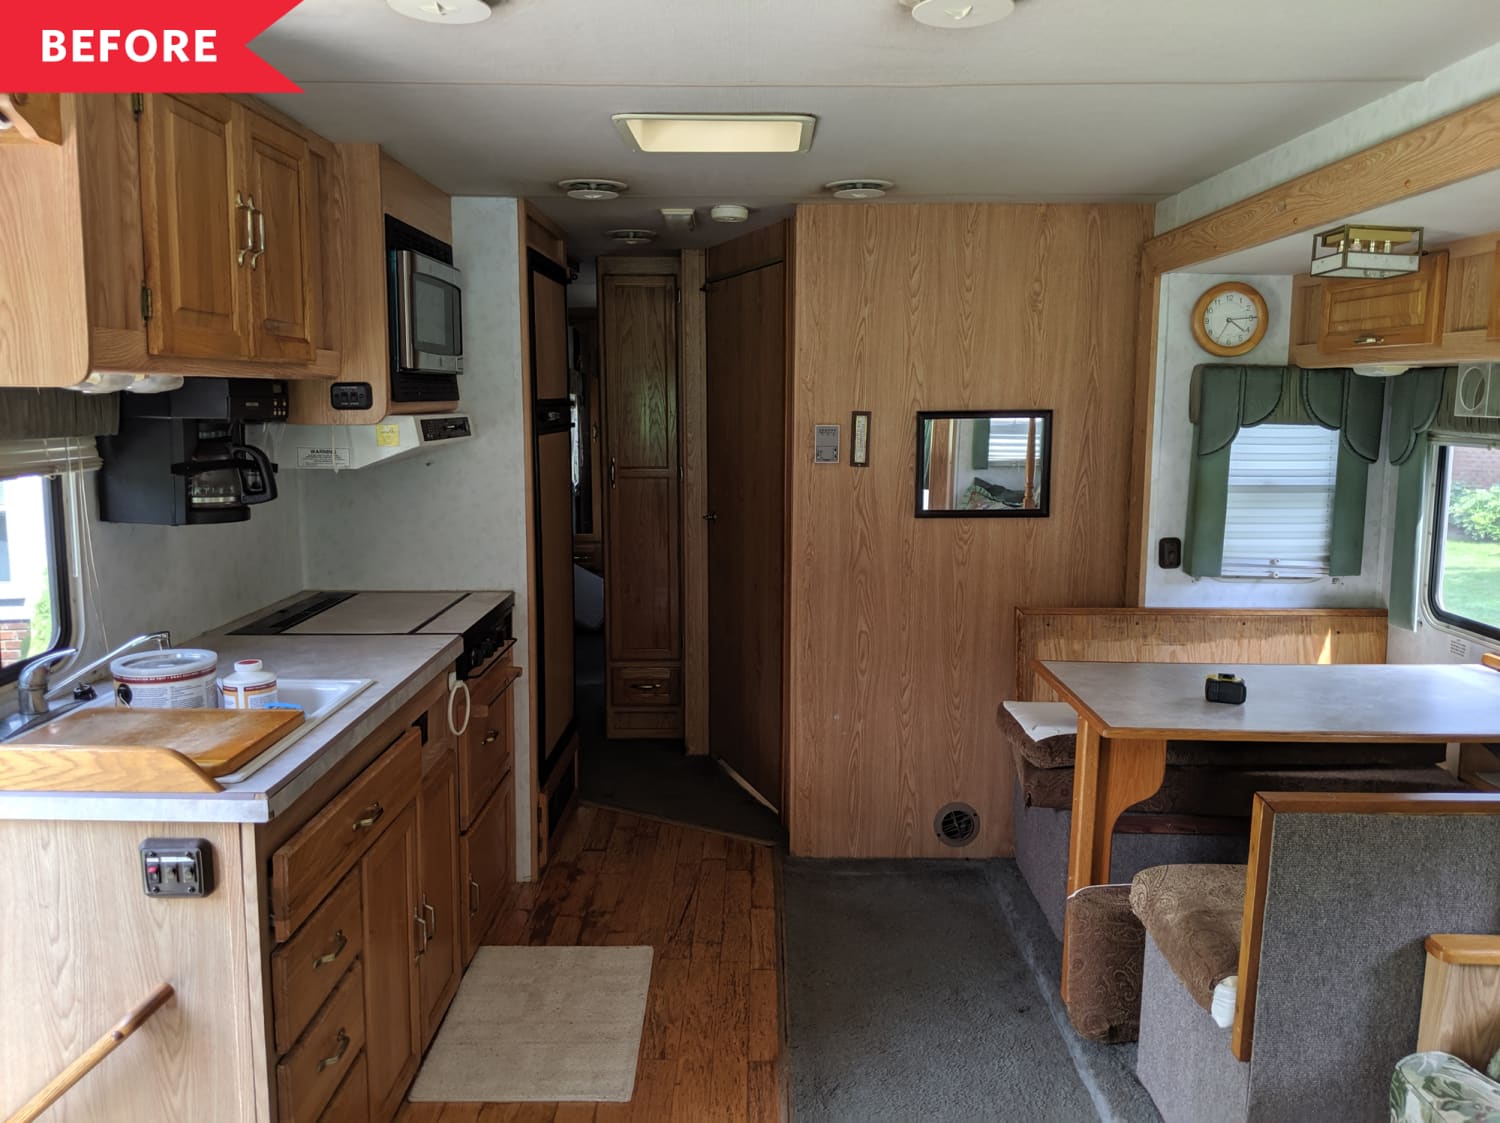 Before & After: An Outdated RV Gets a Gorgeous Update Thanks to Some Paint and Sharpie Markers